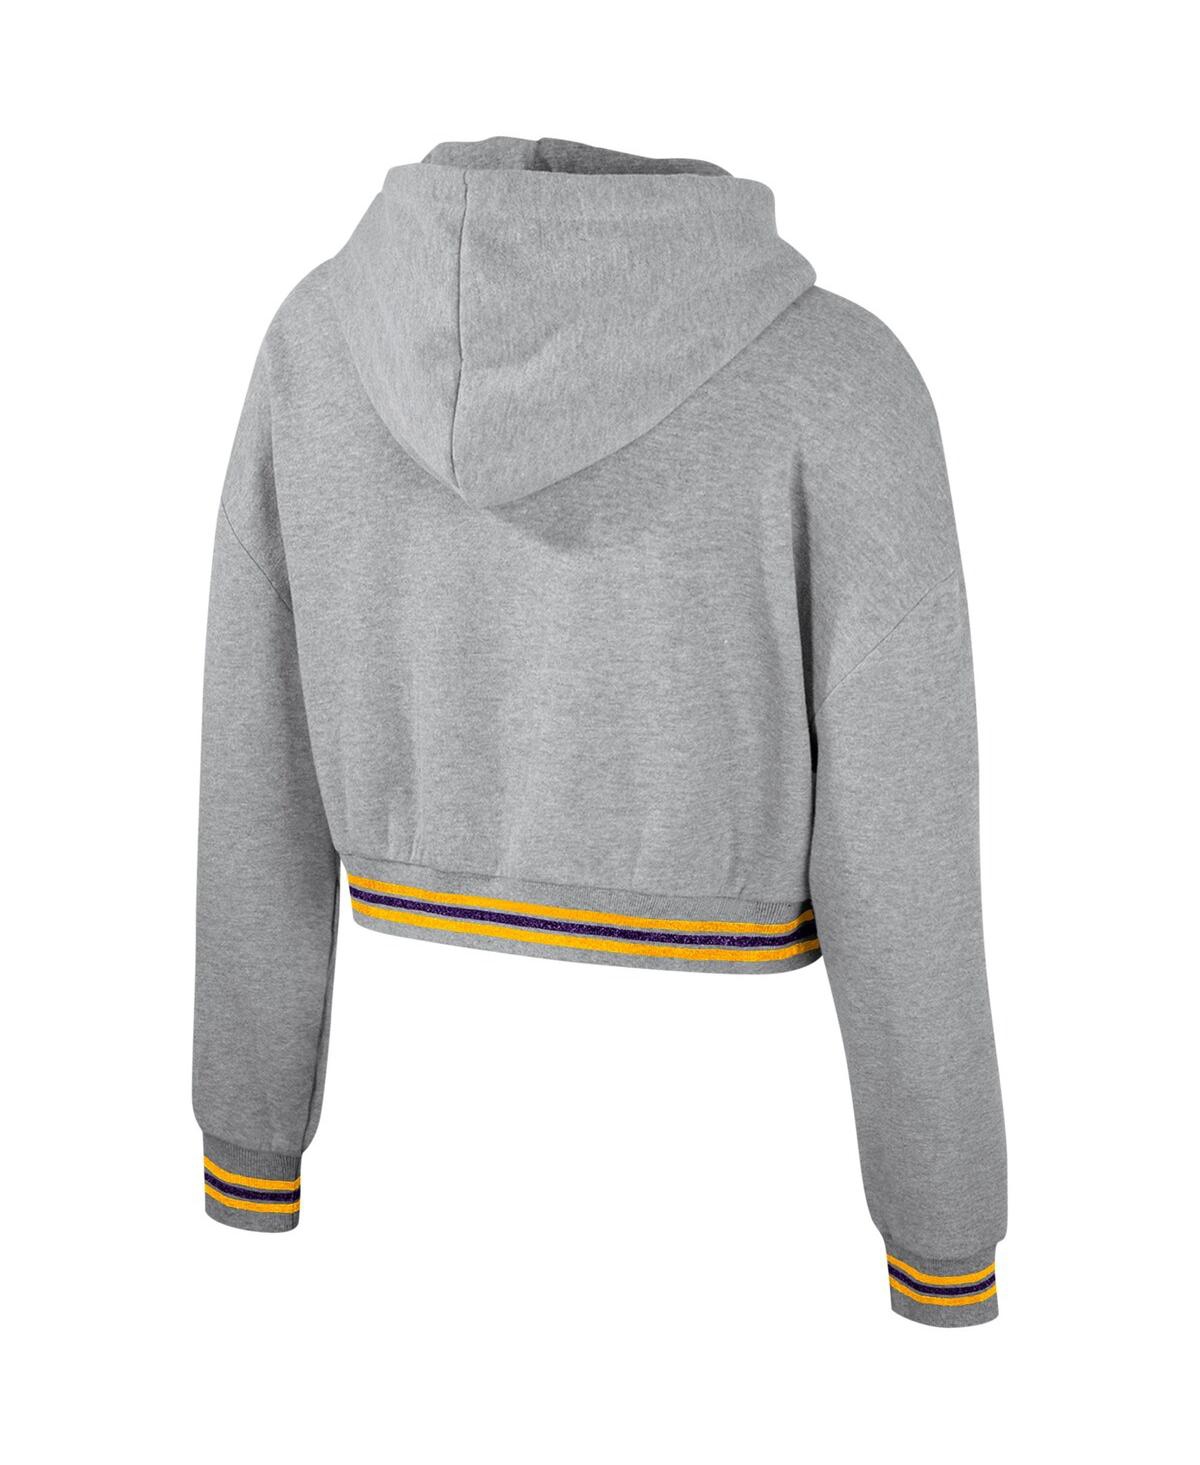 Shop The Wild Collective Women's  Heather Gray Distressed Lsu Tigers Cropped Shimmer Pullover Hoodie